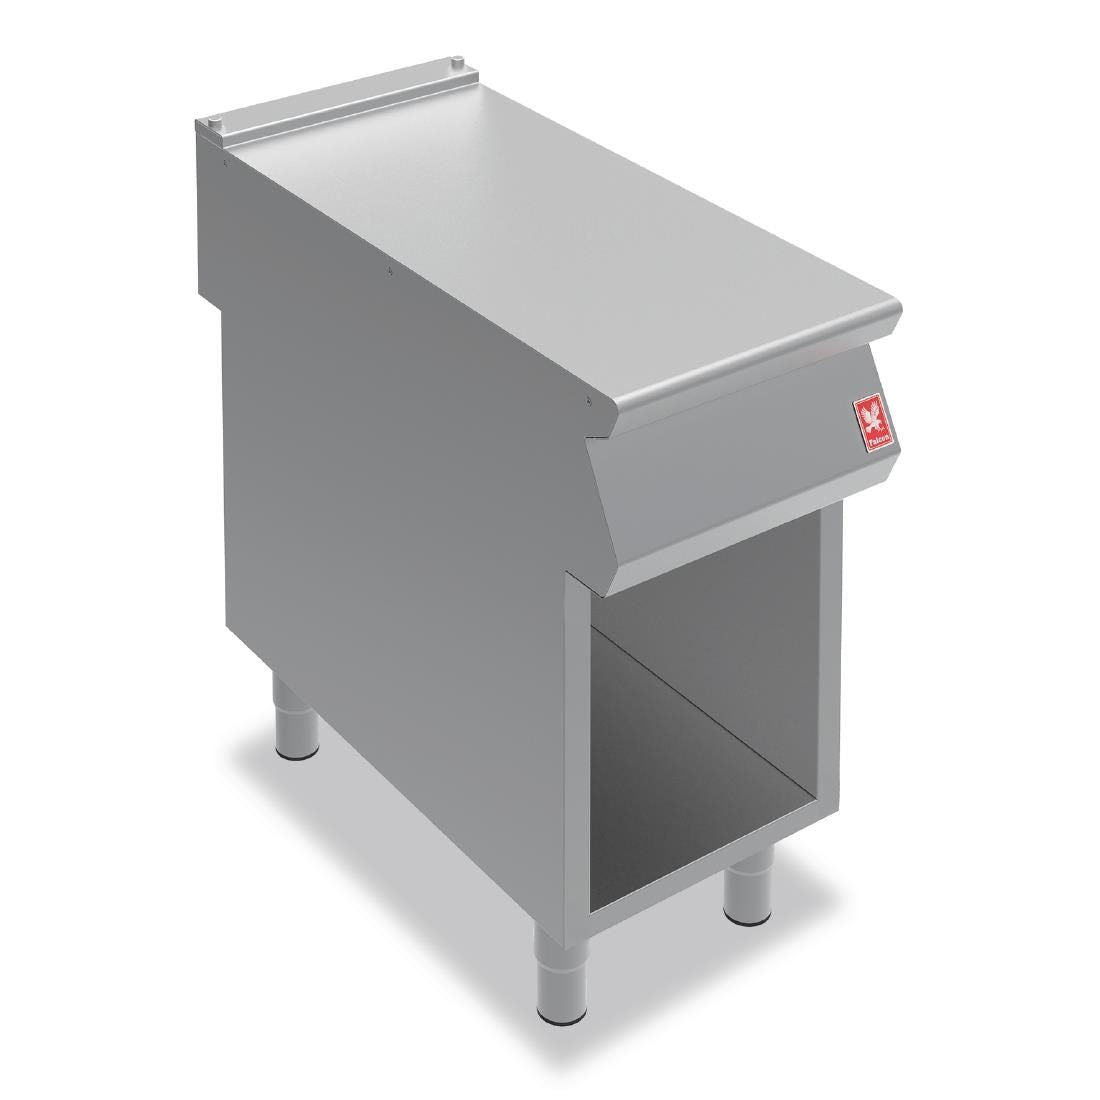 Falcon F900 Open Cabinet on Legs N940 JD Catering Equipment Solutions Ltd